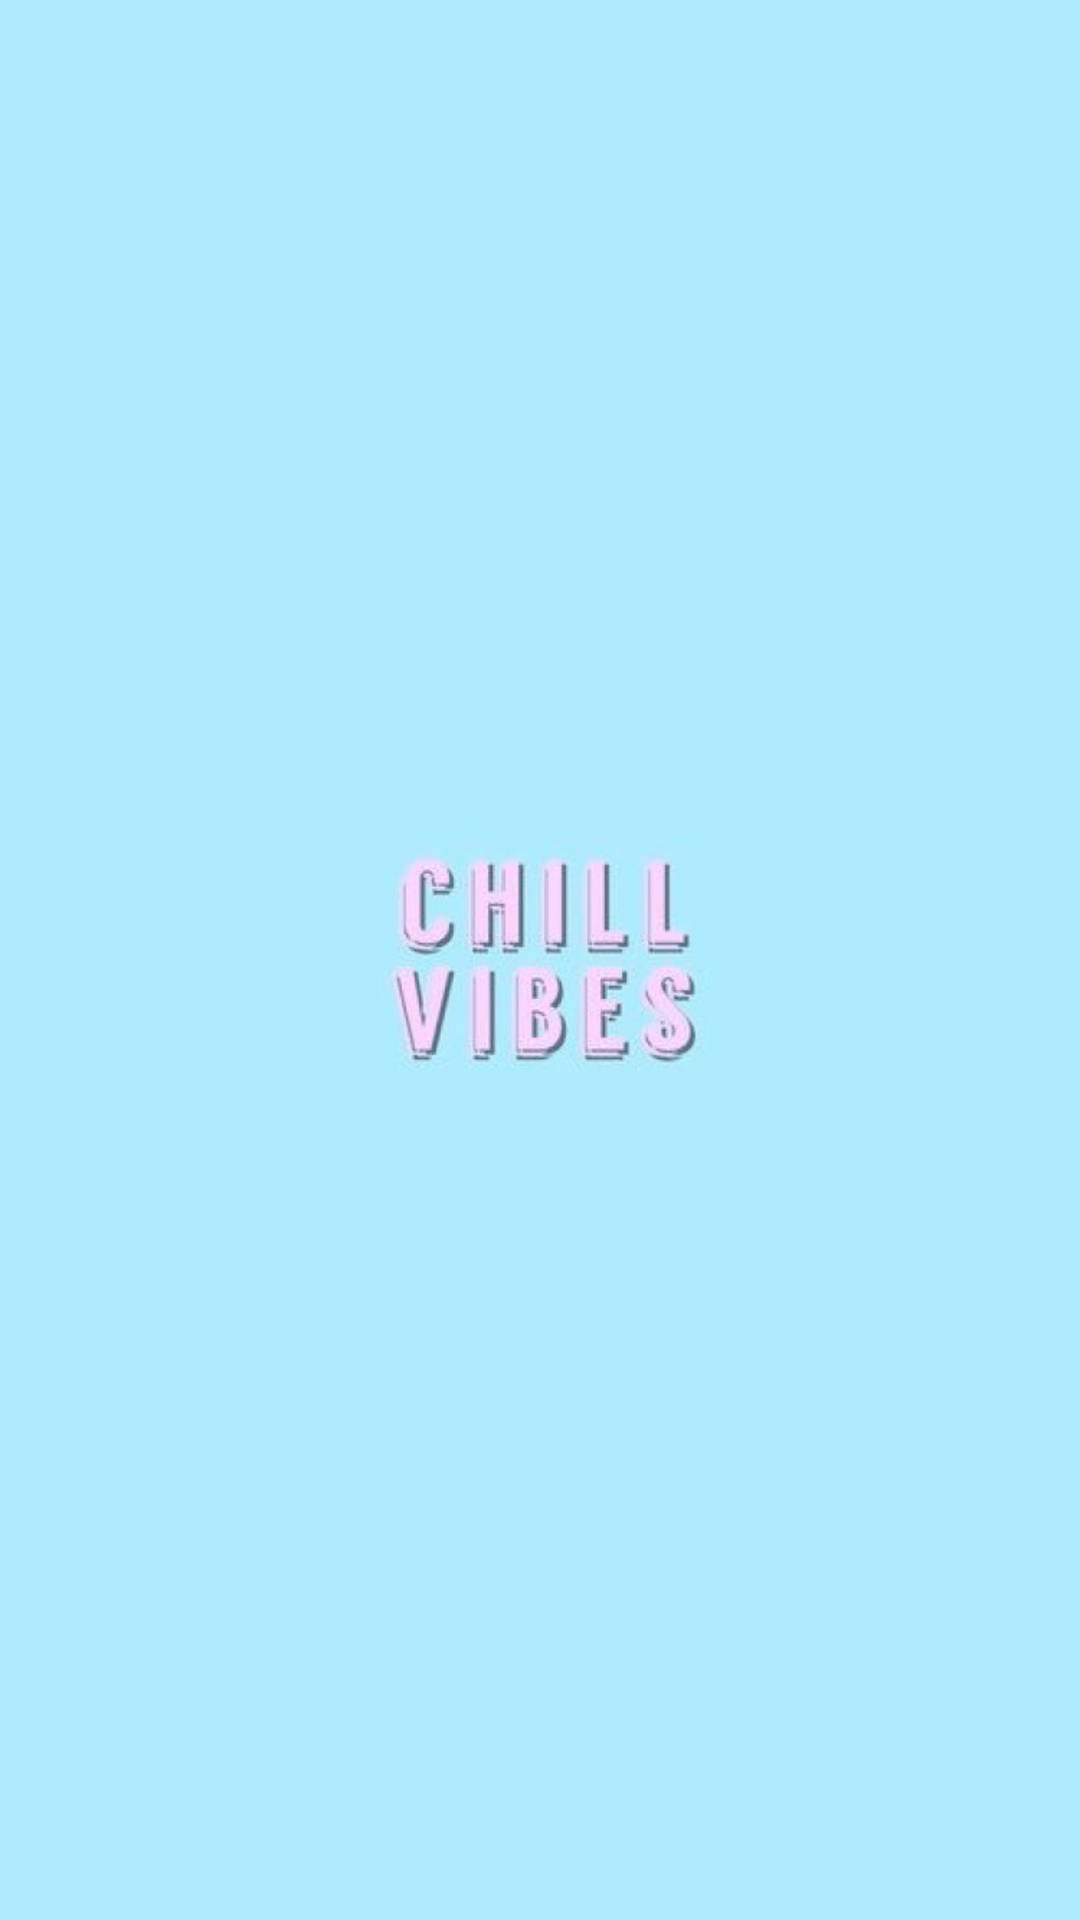 Cute Chill Vibes Background